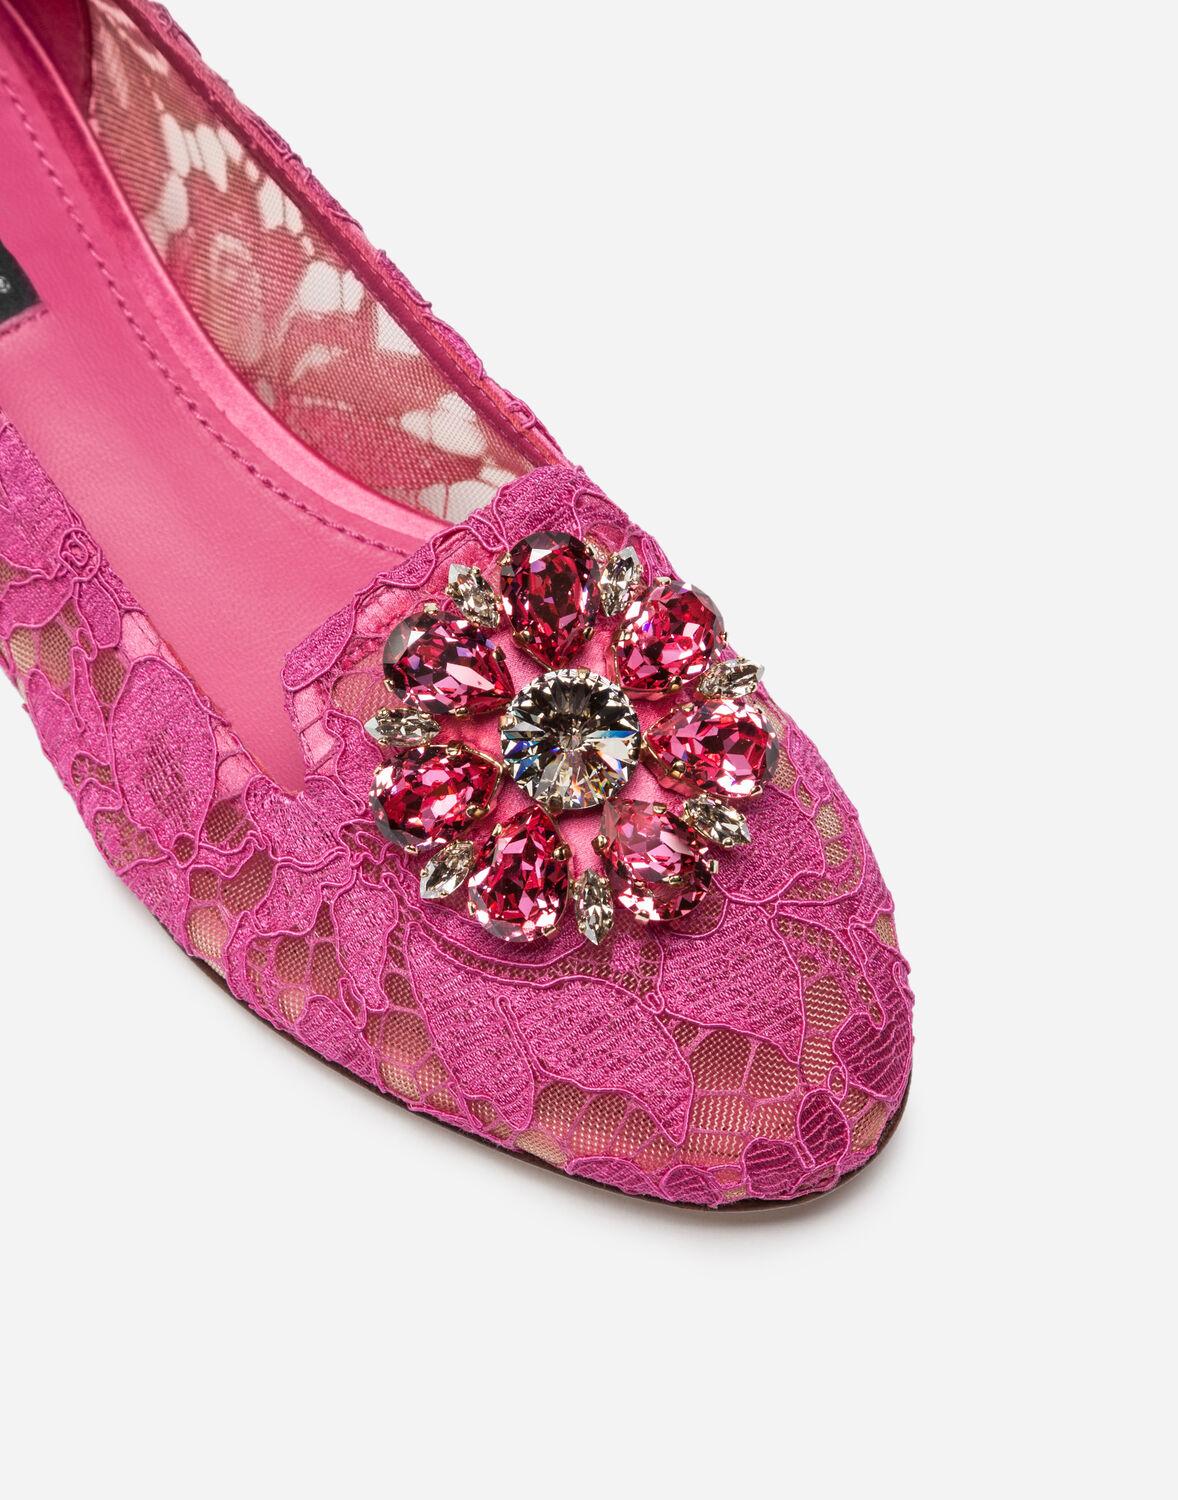 Dolce & Gabbana Slipper In Taormina Lace With Crystals - Lyst